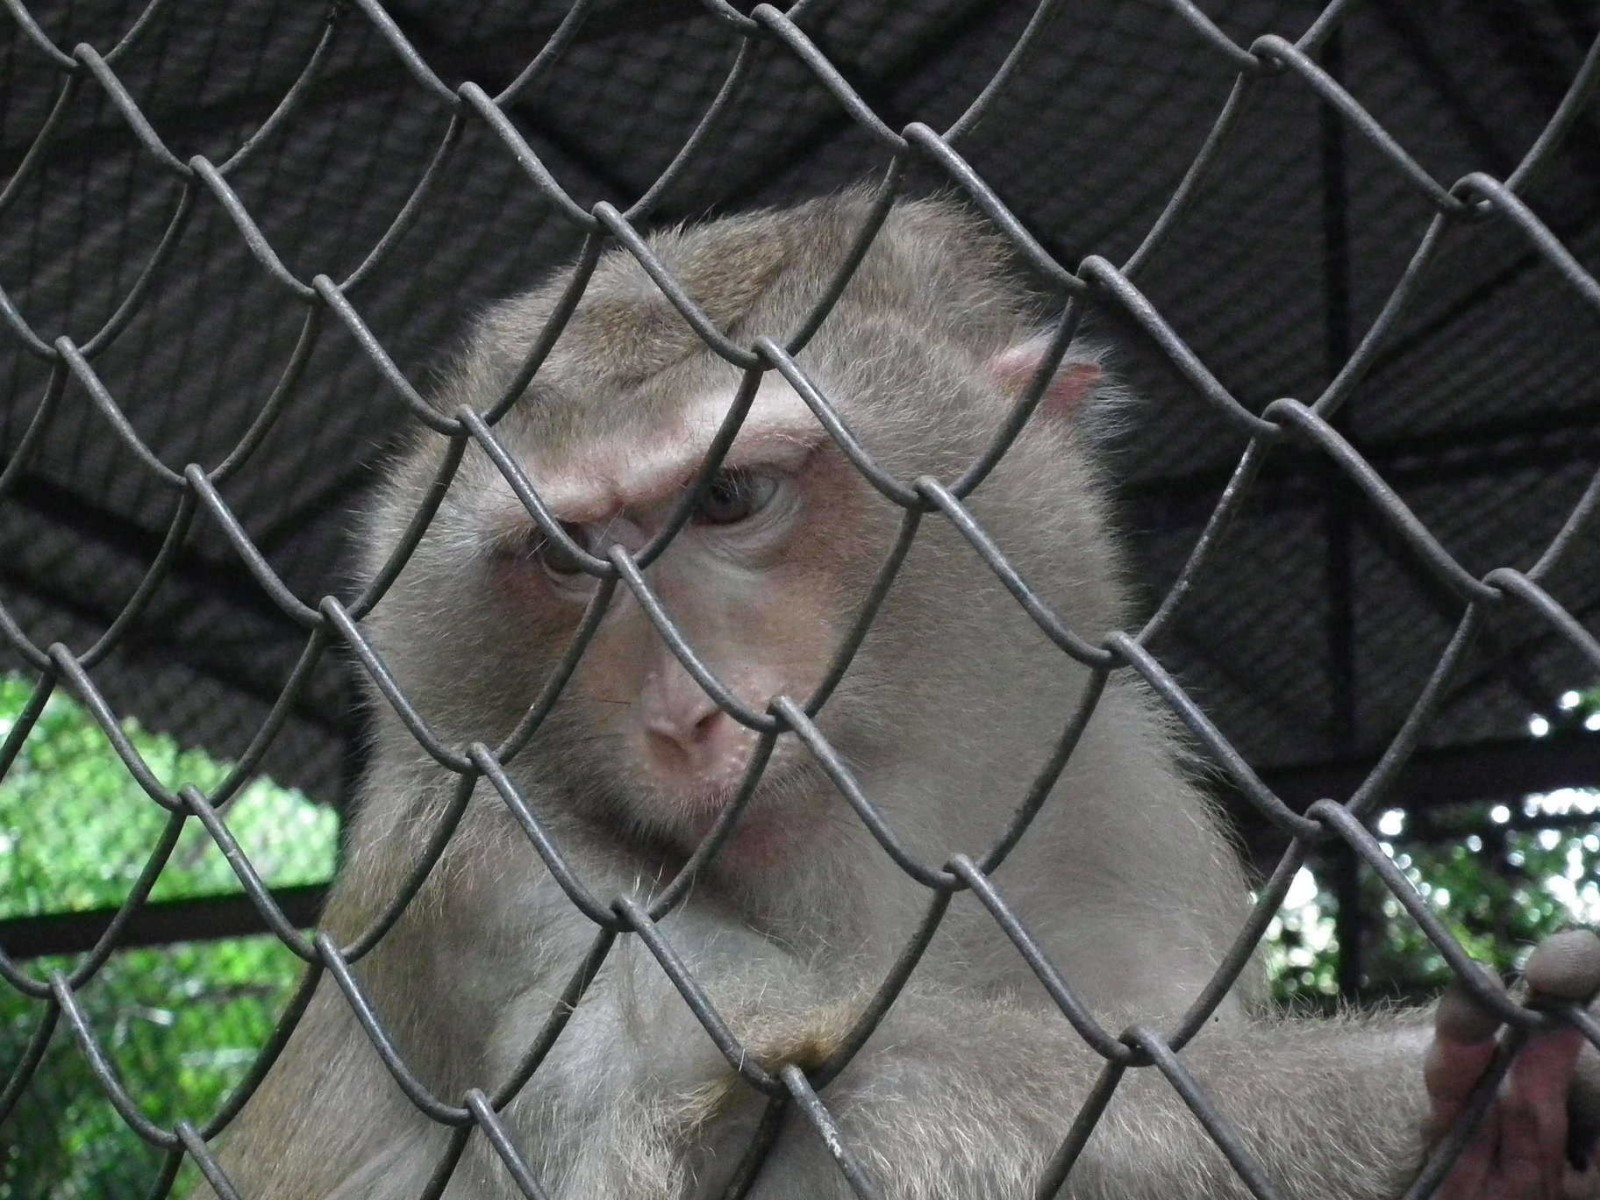 Monkey at Temple
